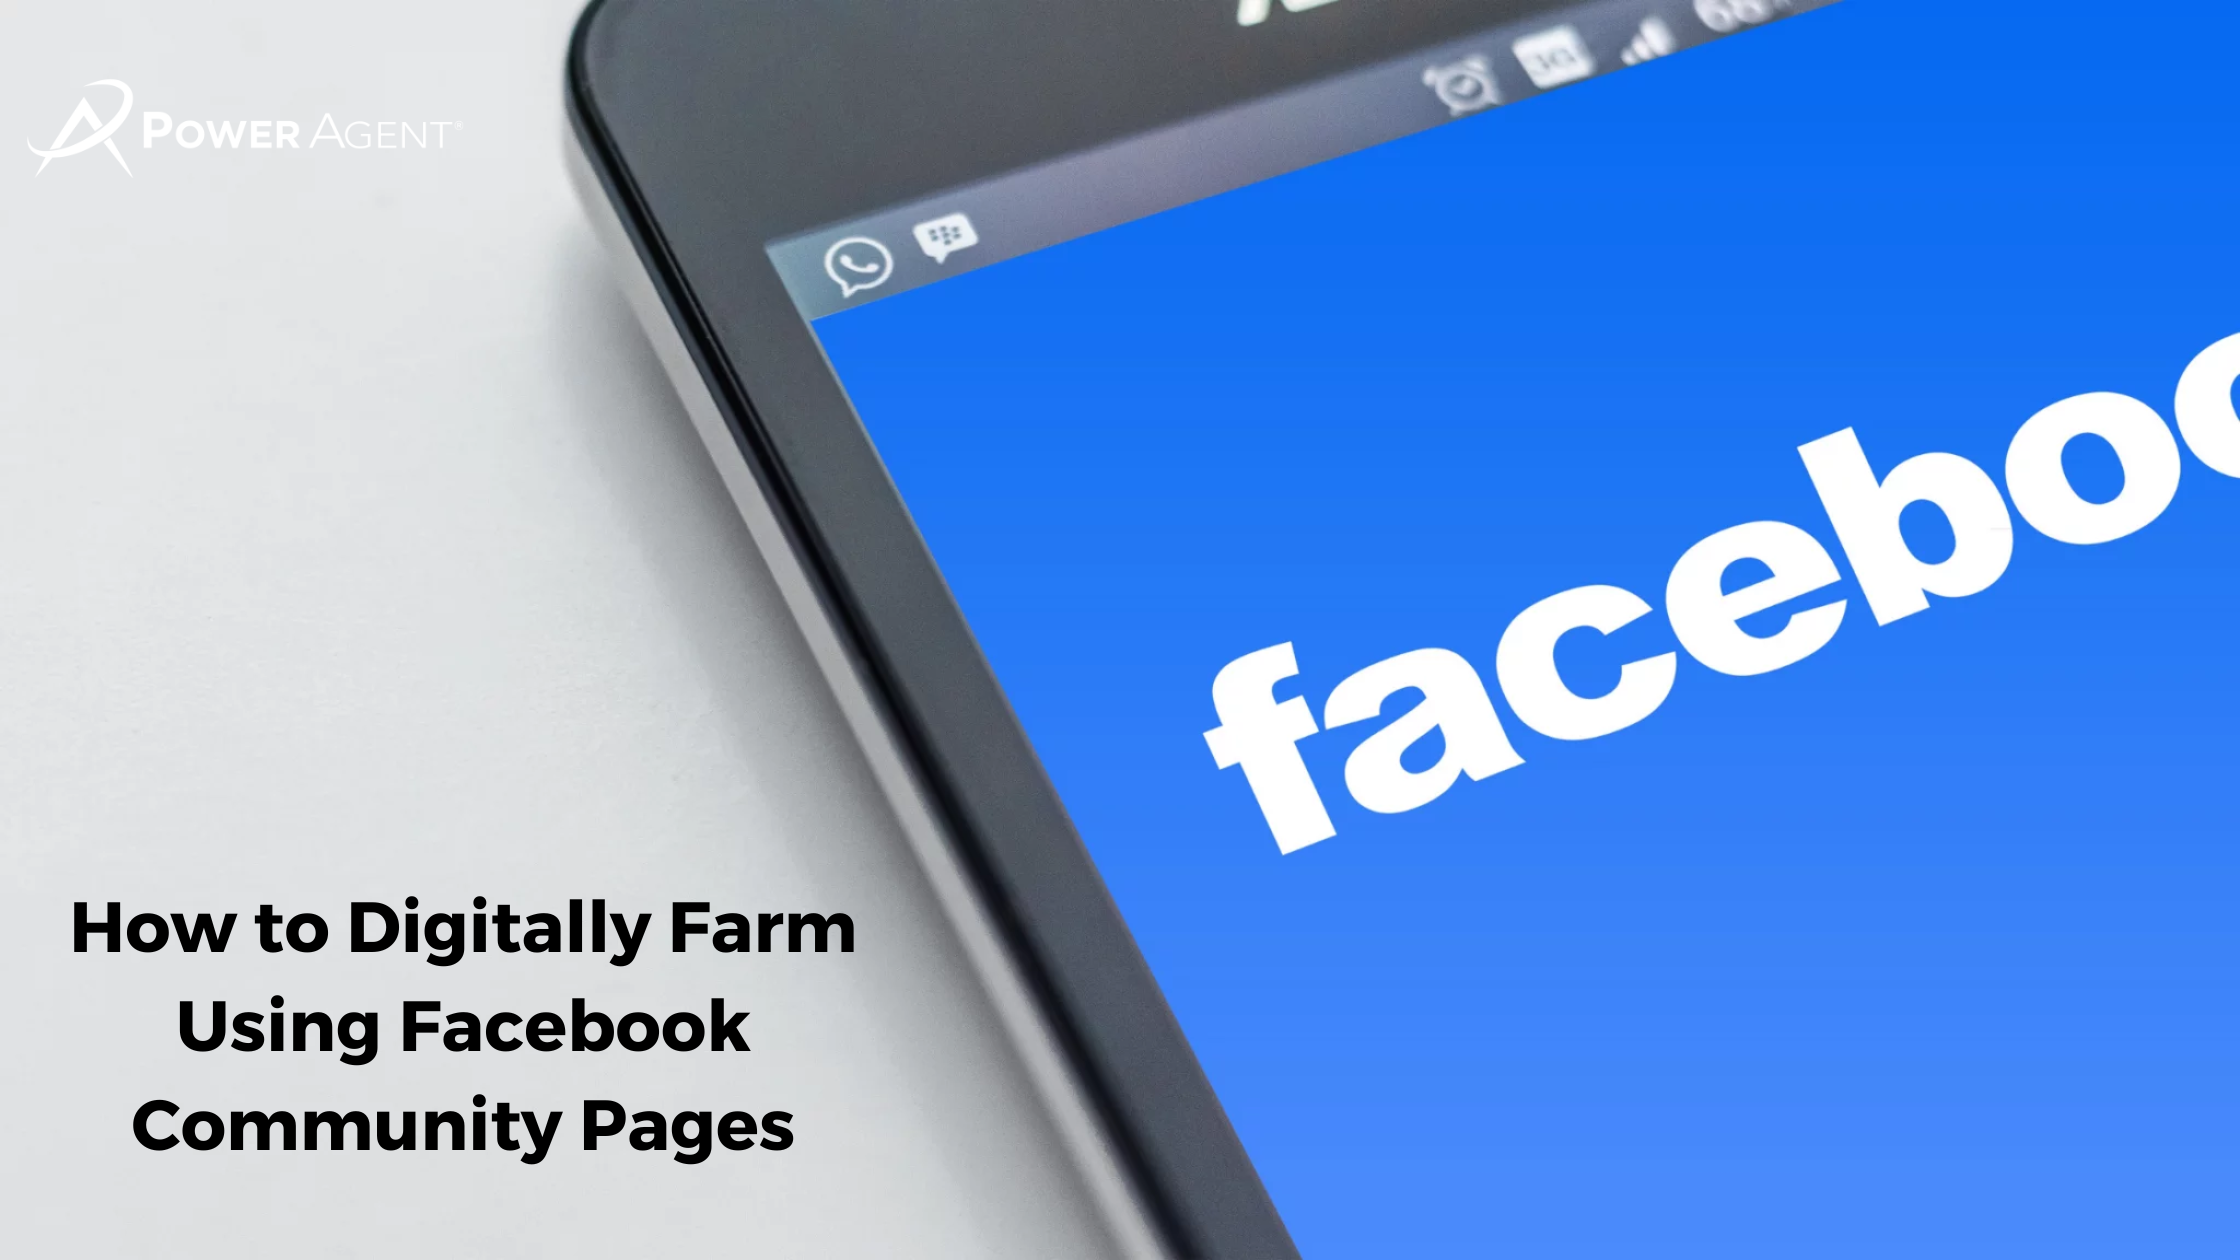 How to Digitally Farm Using Facebook Community Pages